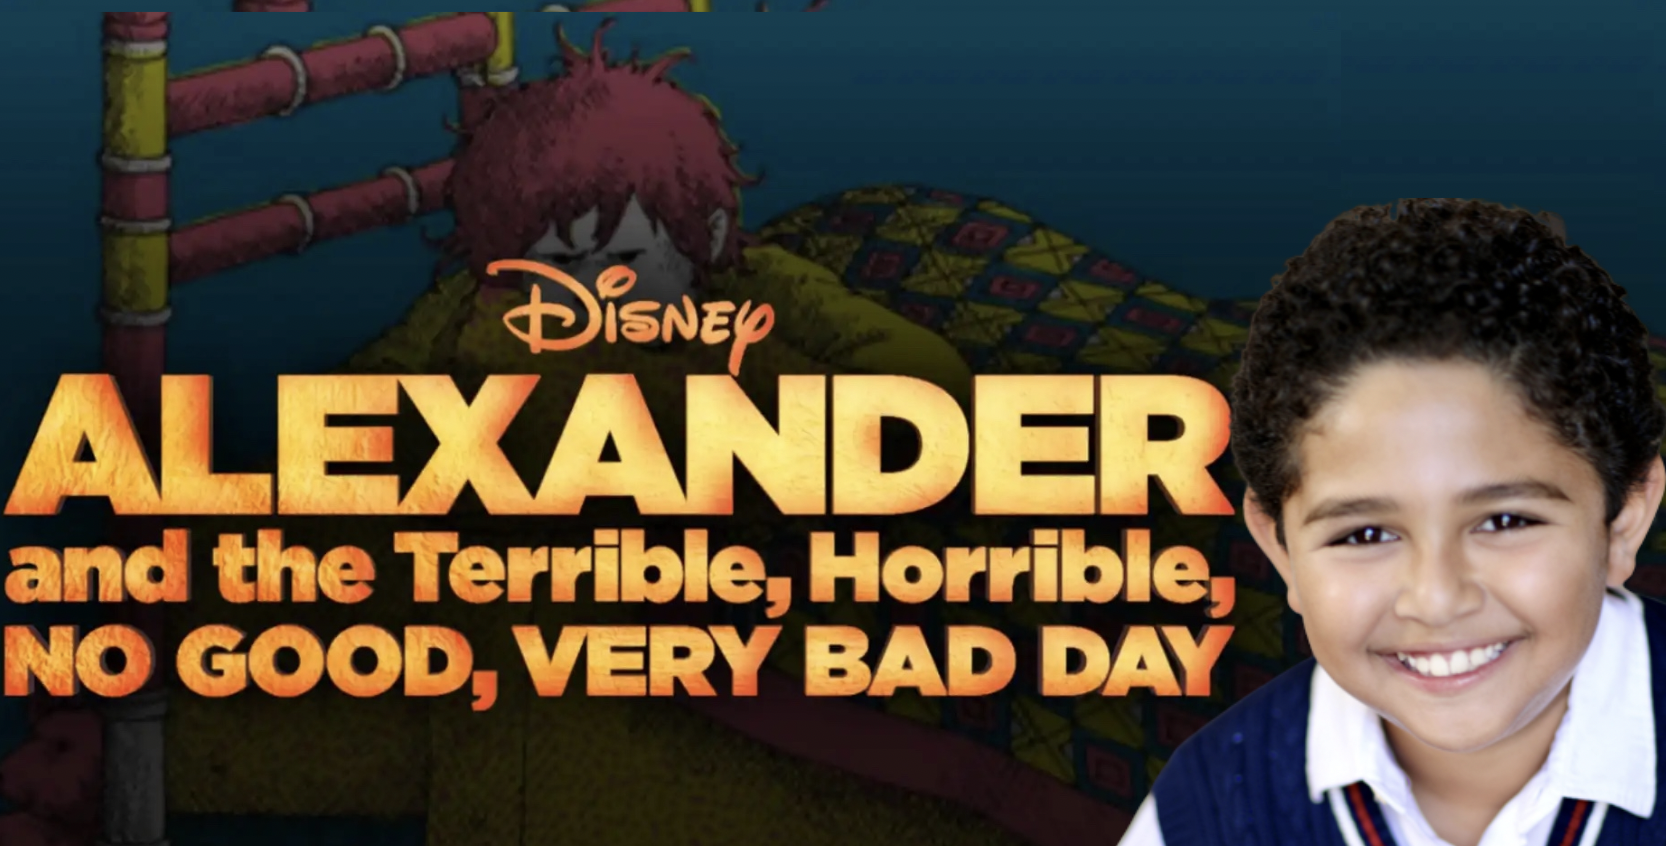 Disney’s New ‘Alexander and the Terrible, Horrible, No Good, Very Bad Day’ Film Finds Its Star